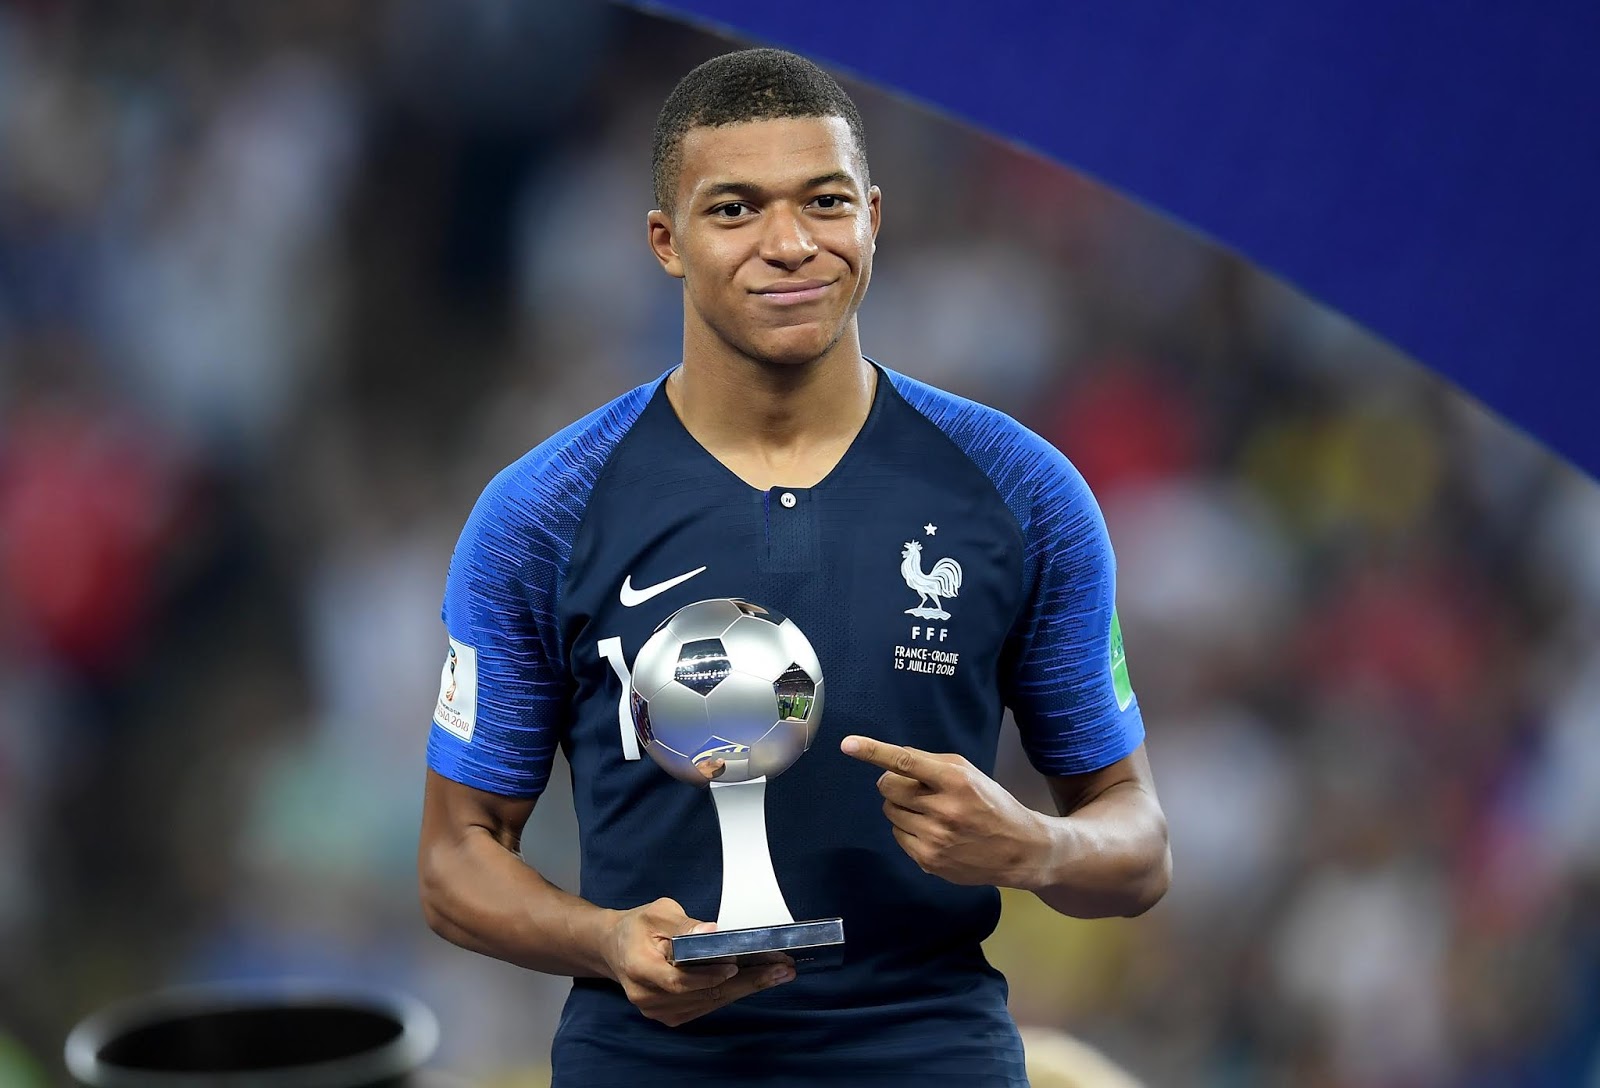 World Cup 2018 Awards Who Won The Golden Boot, Ball and Gloves